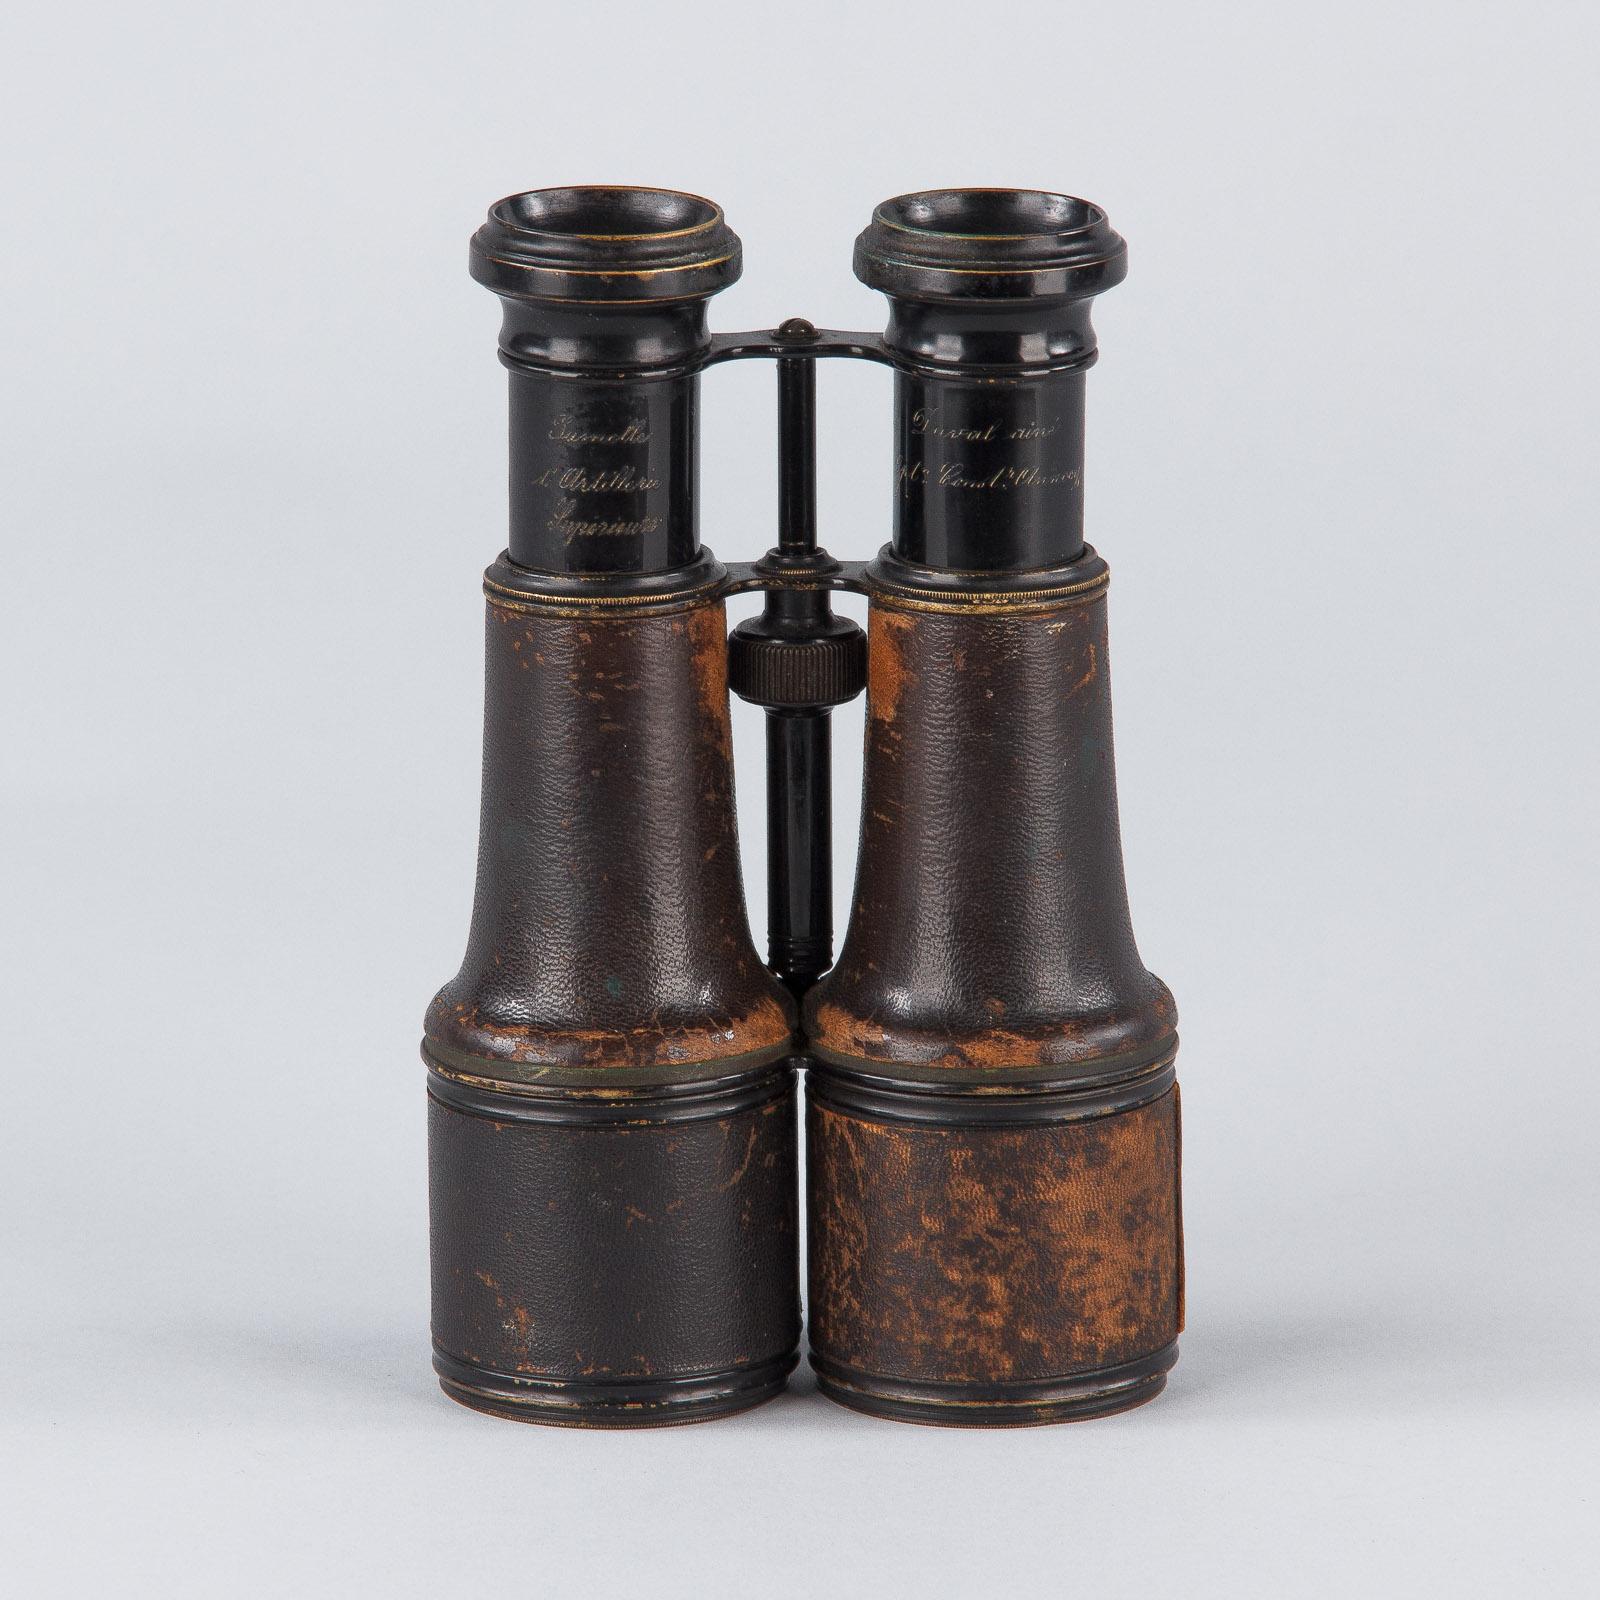 A Pair of WWI artillery binoculars by Duval Aine, optician in Annecy, France. The binoculars are in working order, they are made of metal and covered in black leather. A nice militaria collector's piece.